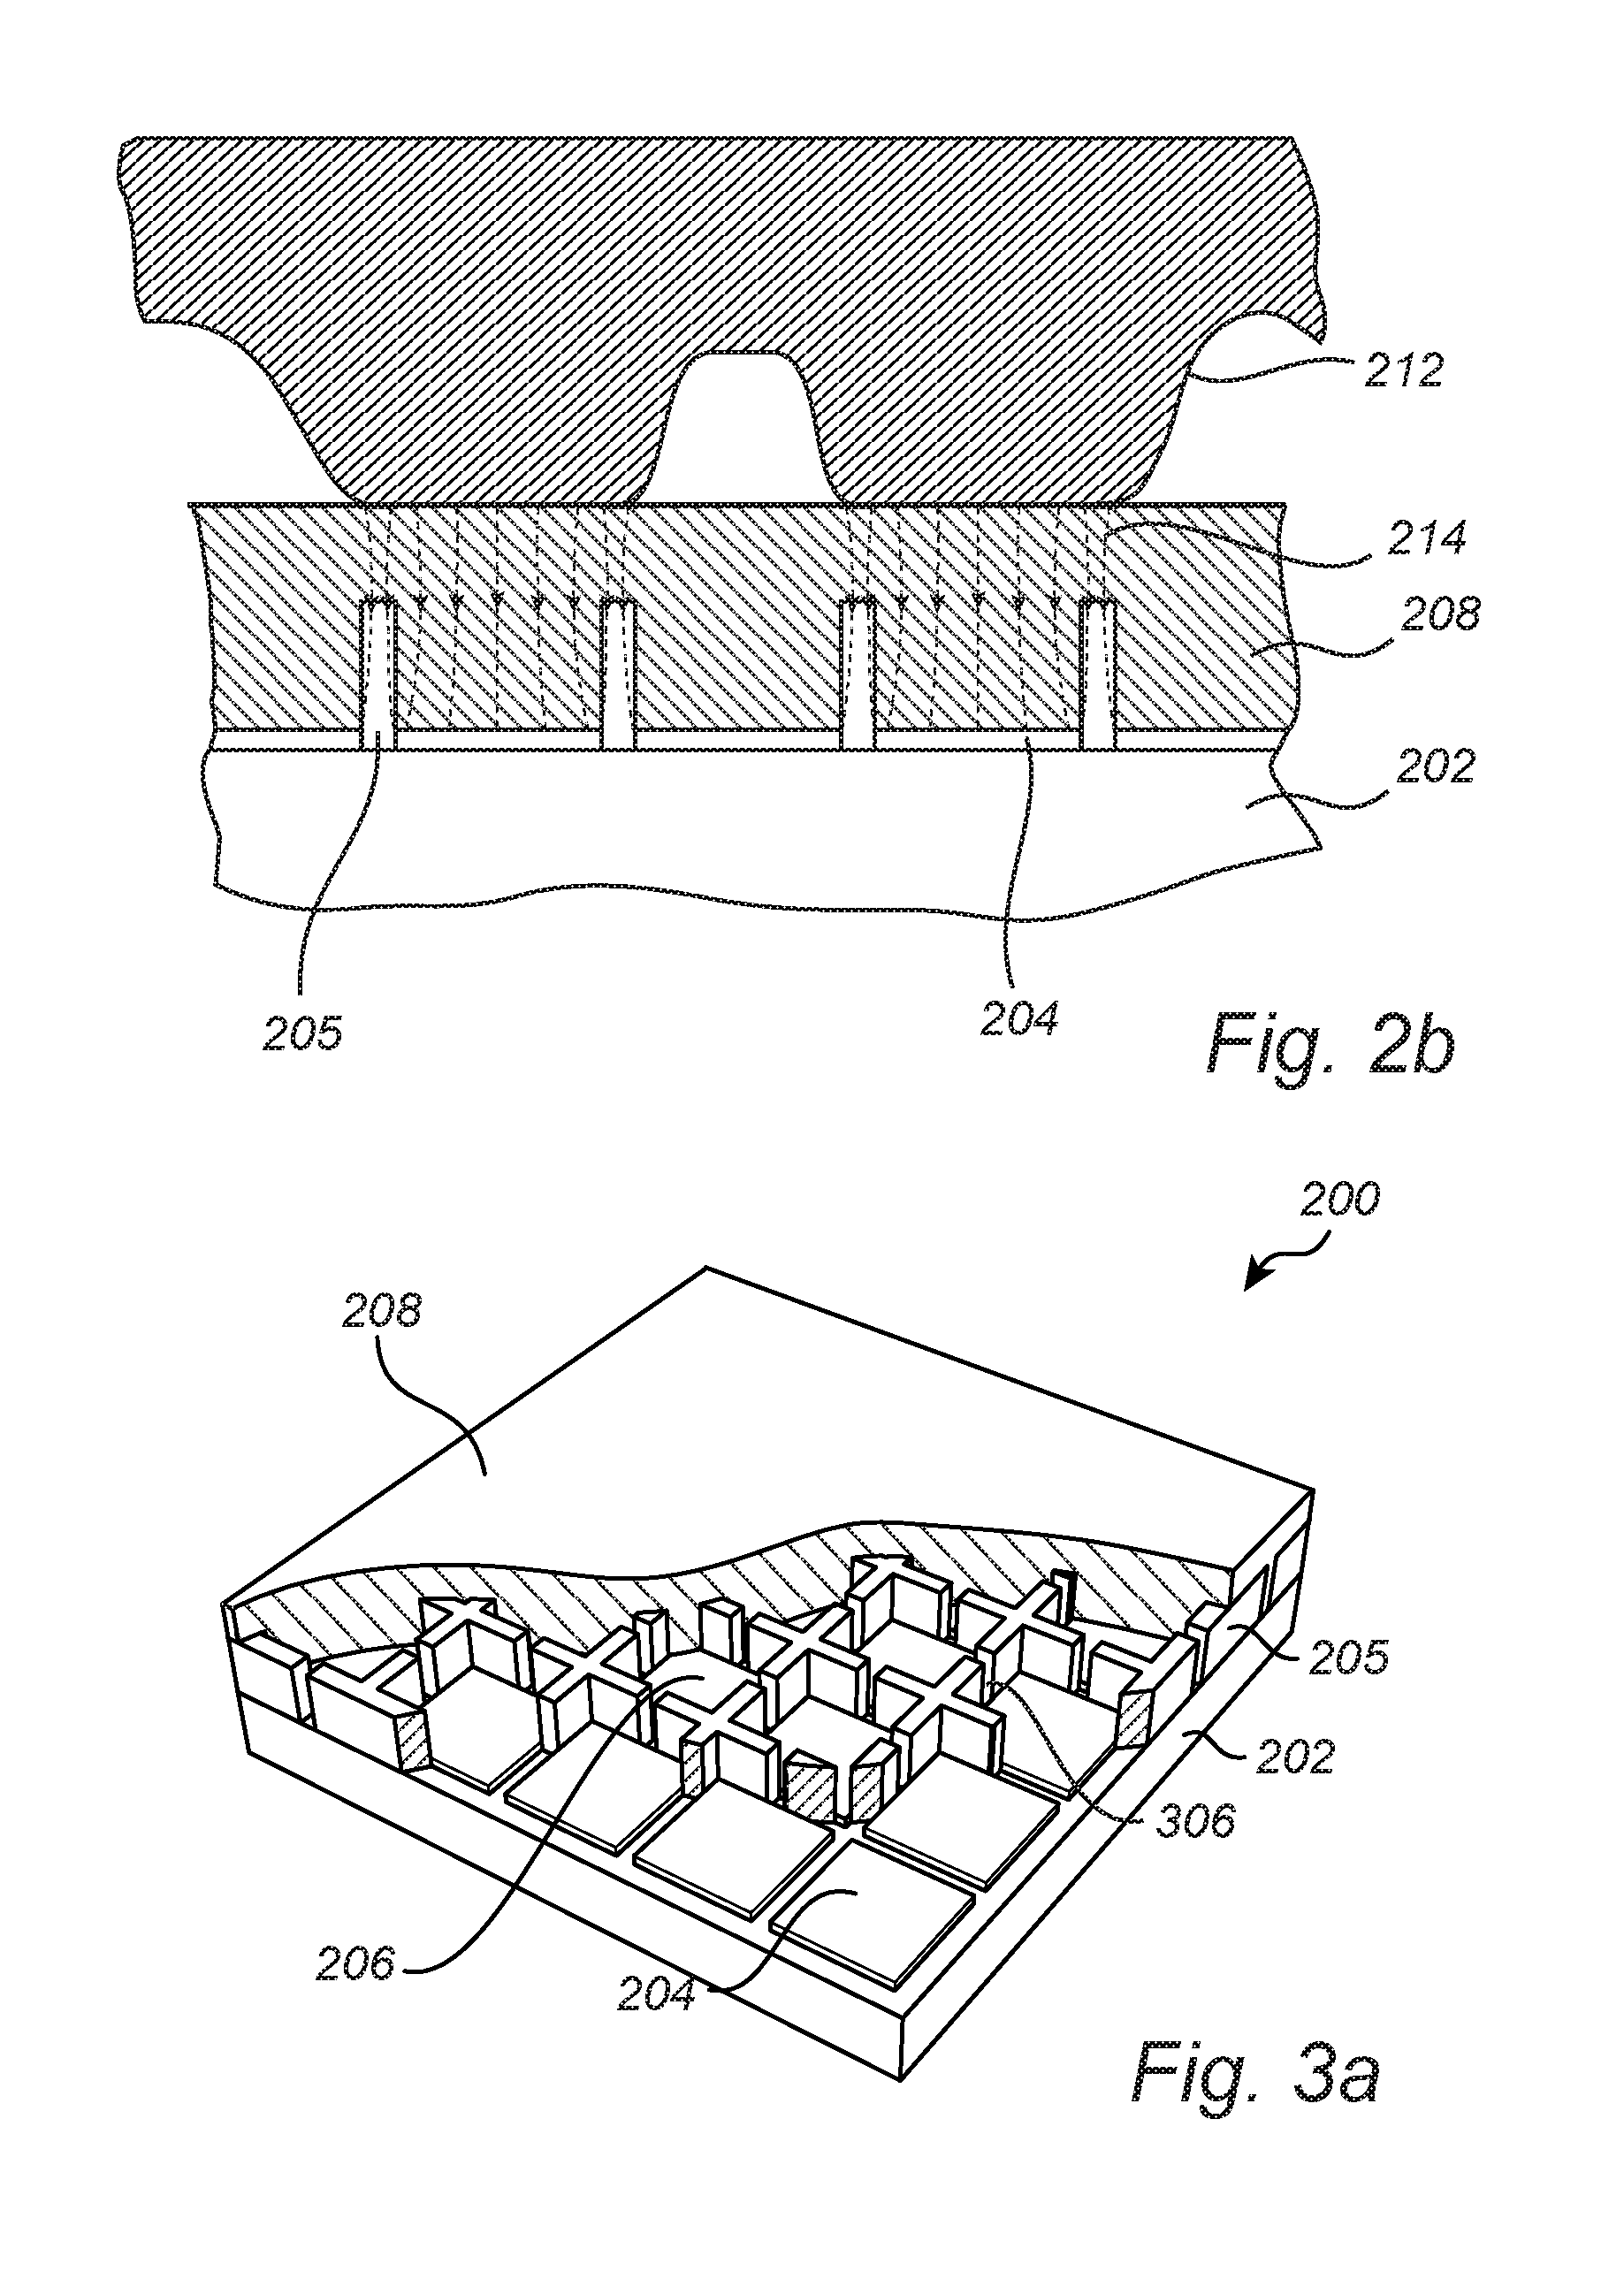 Fingerprint sensing device with heterogeneous coating structure comprising a mold